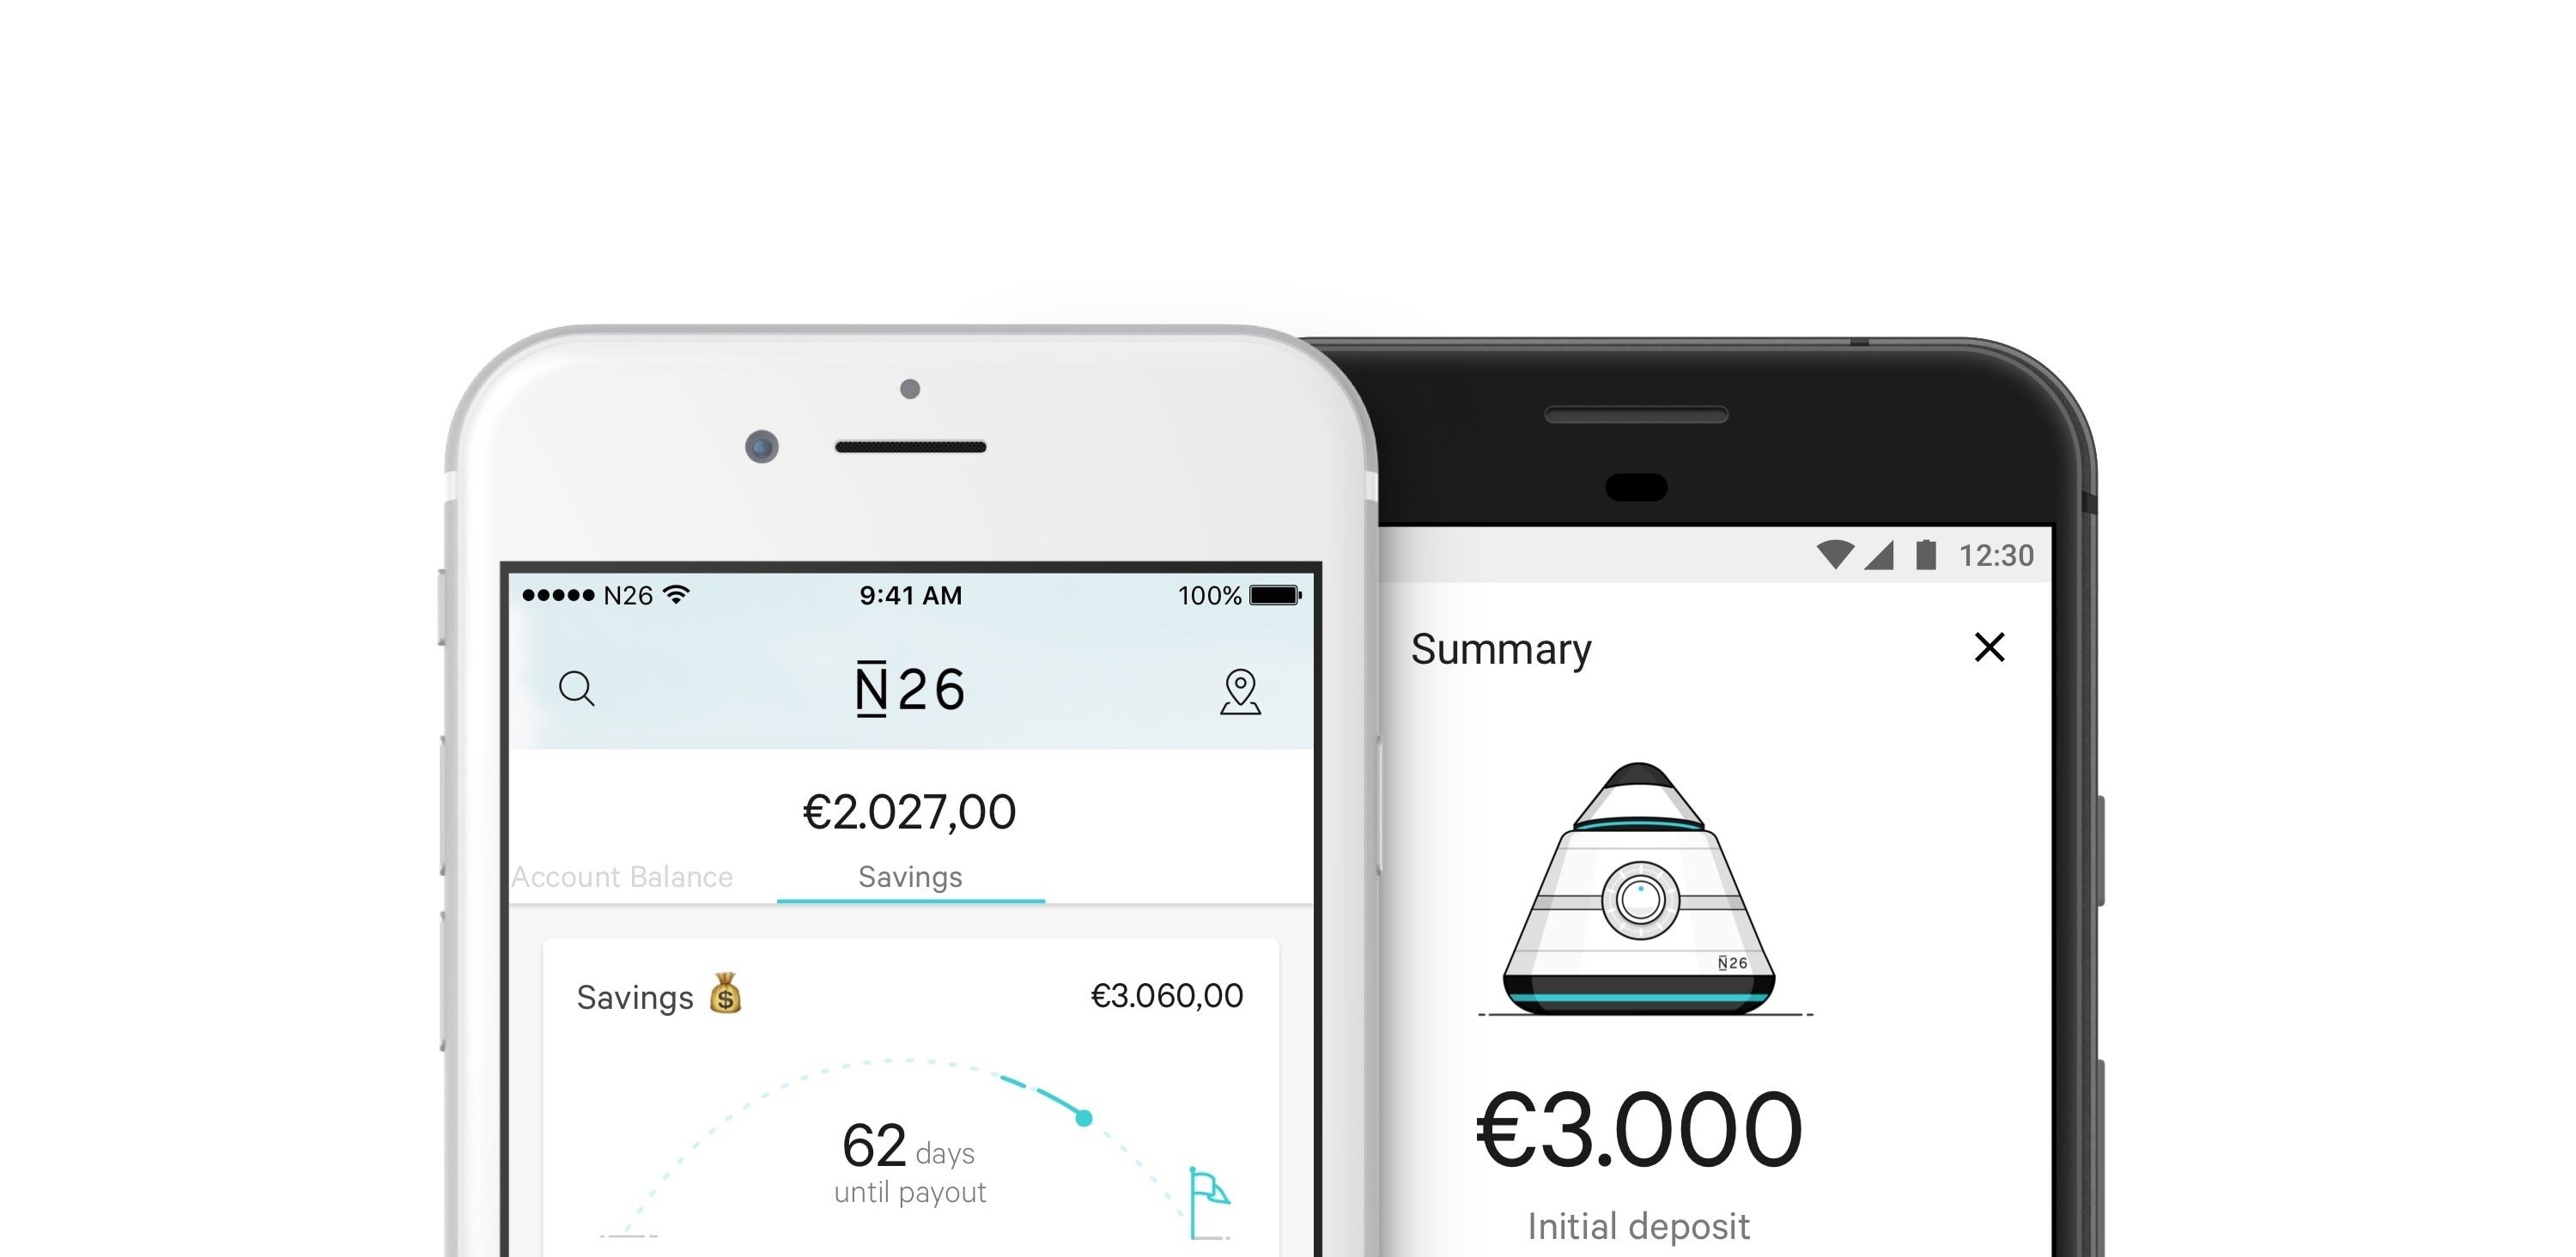 N26 and Raisin partner to offer innovative savings products at attractive rates